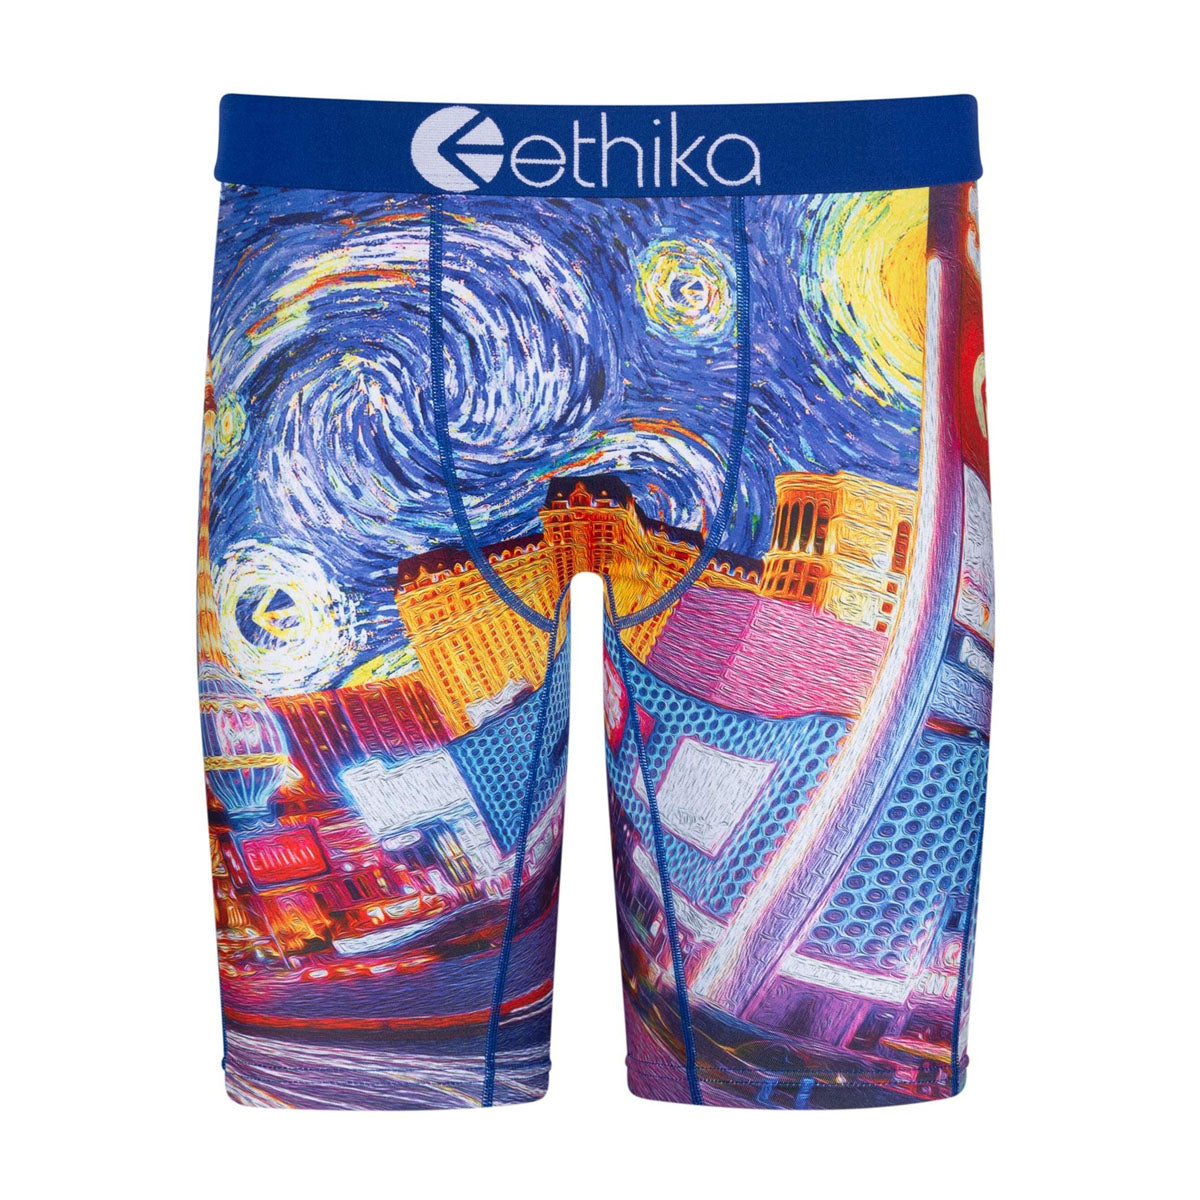 Ethika Staple boxer brief and sports bra set in Expression Session